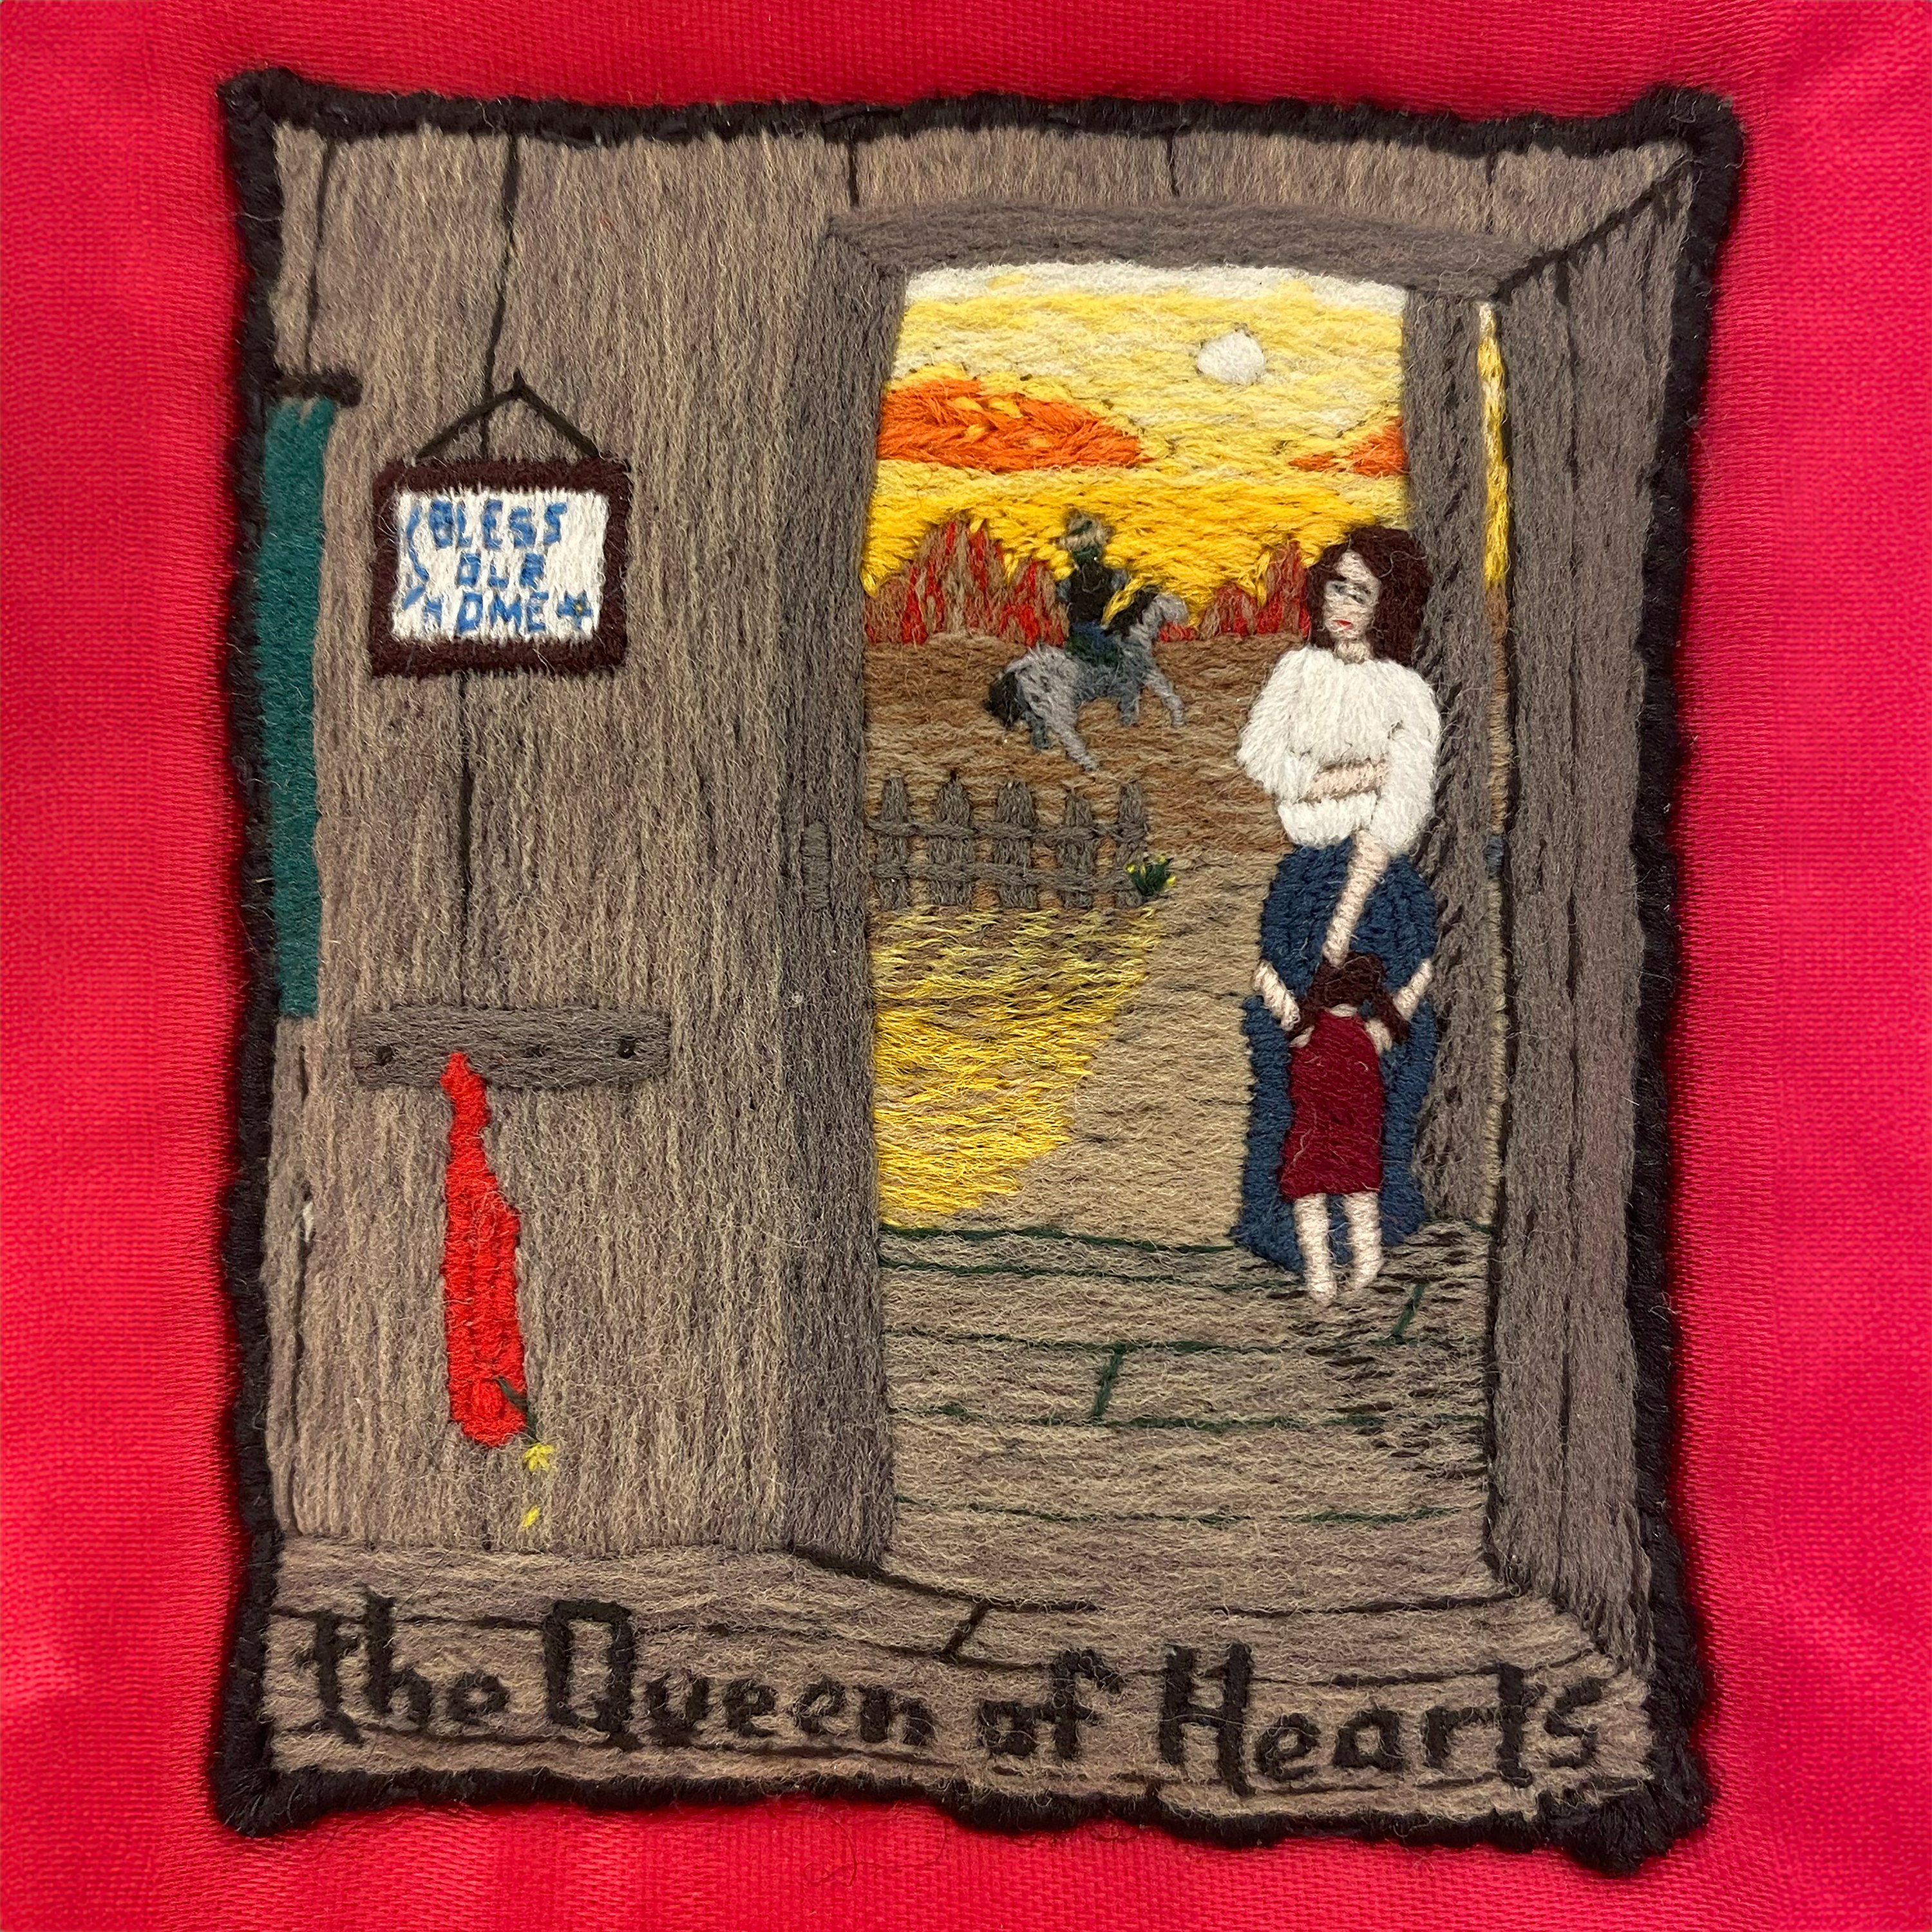 Ray Materson embroidered Queen of Hearts in a Connecticut prison using thread from unraveled socks, silk, and fiber. It will appear in Between the Lines: Prison Art and Advocacy at the Museum of International Folk Art. 3.75 x 5.5 in. Photo by Chloe Accardi. 